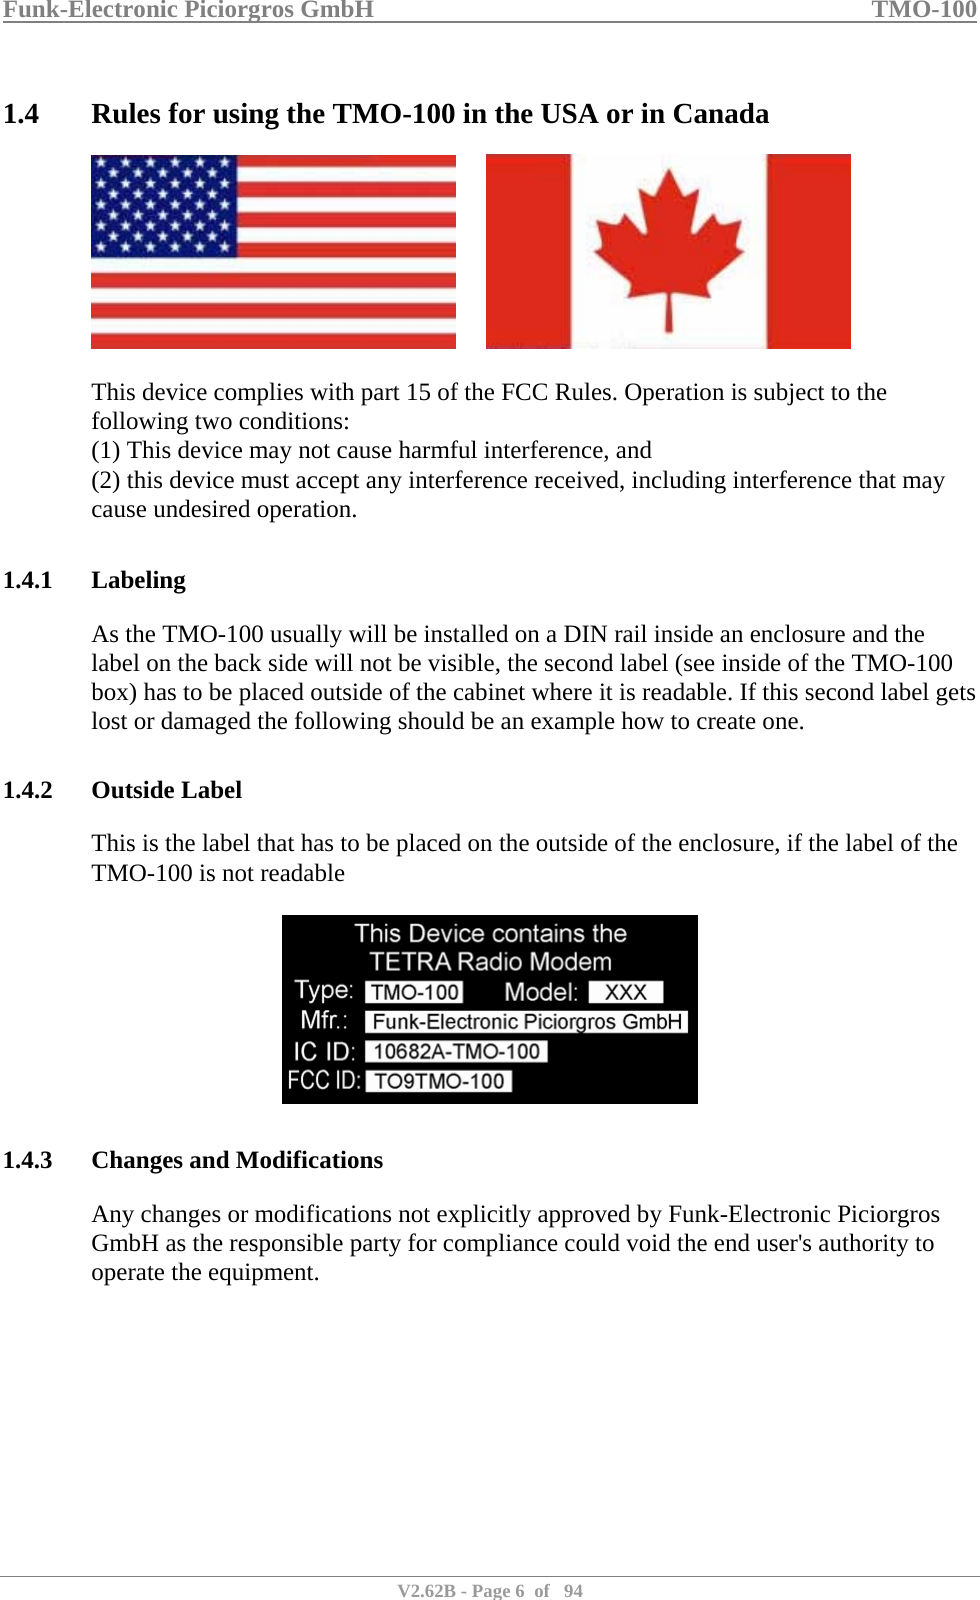 Funk-Electronic Piciorgros GmbH   TMO-100   V2.62B - Page 6  of   94   1.4 Rules for using the TMO-100 in the USA or in Canada          This device complies with part 15 of the FCC Rules. Operation is subject to the following two conditions:  (1) This device may not cause harmful interference, and  (2) this device must accept any interference received, including interference that may cause undesired operation.   1.4.1 Labeling As the TMO-100 usually will be installed on a DIN rail inside an enclosure and the label on the back side will not be visible, the second label (see inside of the TMO-100 box) has to be placed outside of the cabinet where it is readable. If this second label gets lost or damaged the following should be an example how to create one.  1.4.2 Outside Label This is the label that has to be placed on the outside of the enclosure, if the label of the TMO-100 is not readable    1.4.3 Changes and Modifications Any changes or modifications not explicitly approved by Funk-Electronic Piciorgros GmbH as the responsible party for compliance could void the end user&apos;s authority to operate the equipment.           